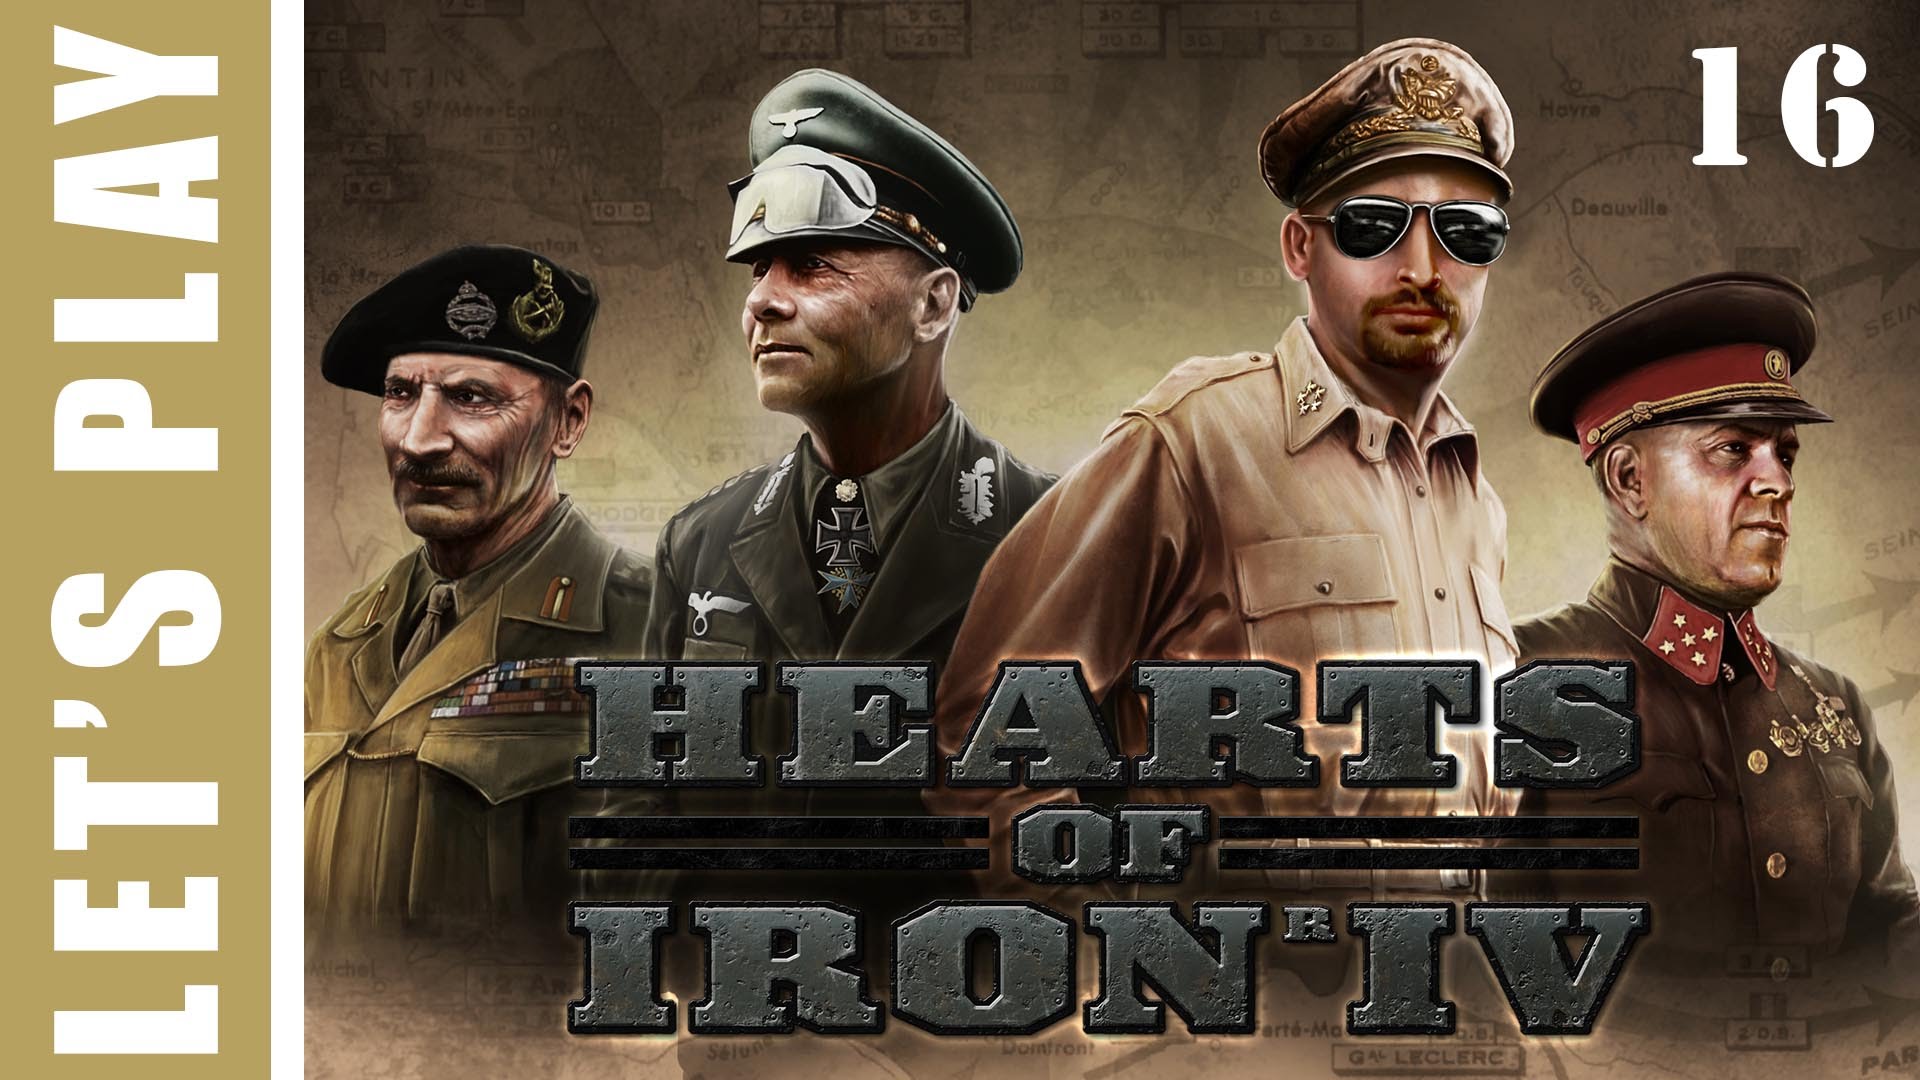 Hearts of Iron IV Germany Wins World War 2 Let’s Play 16